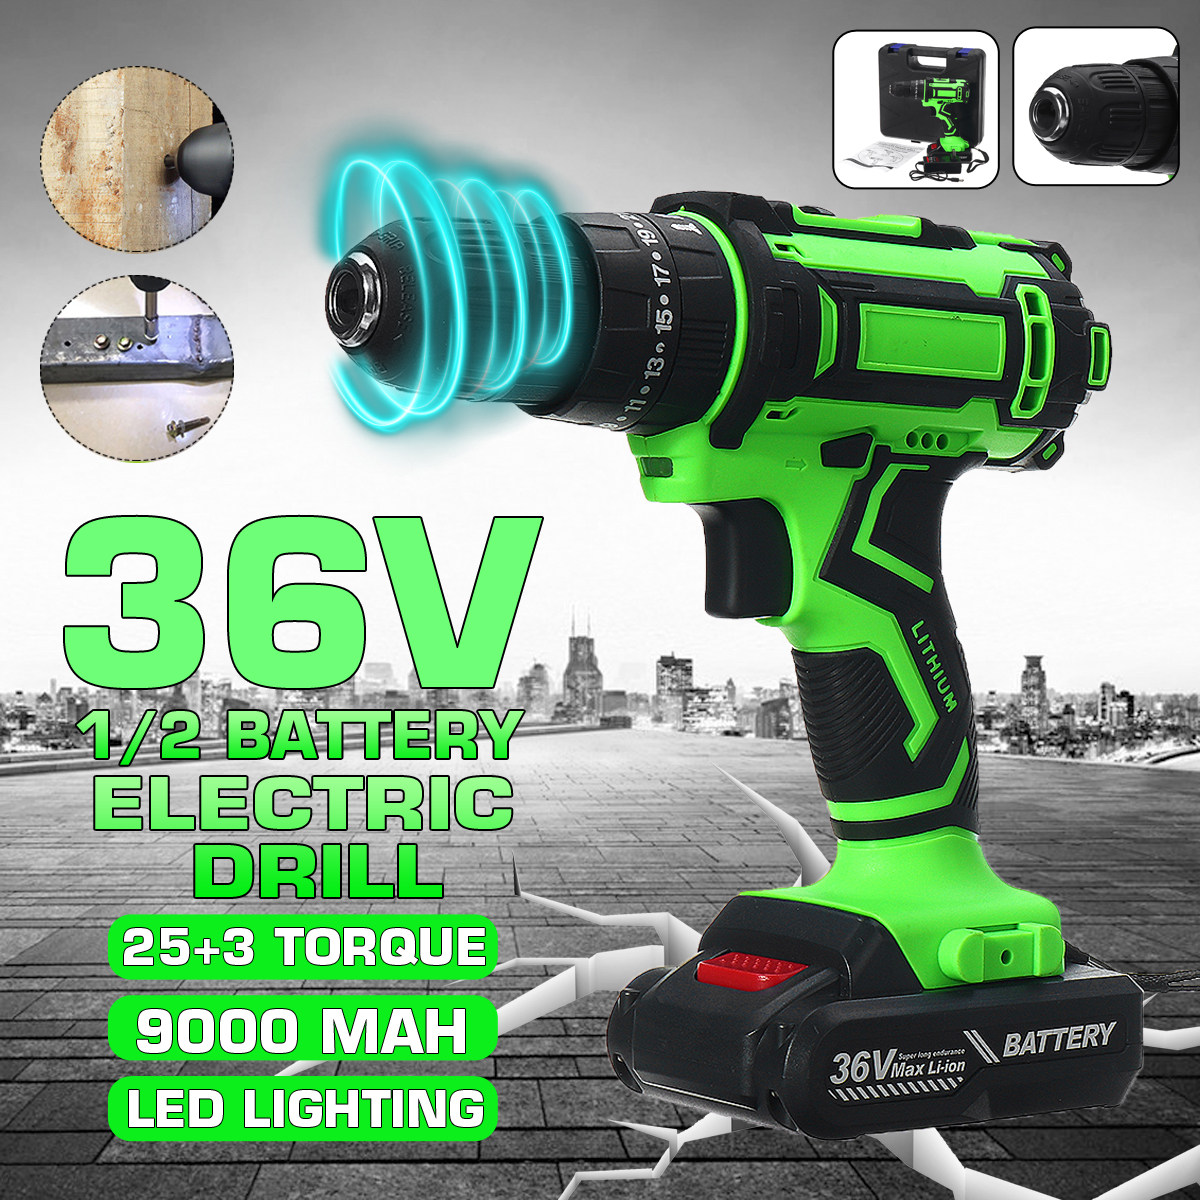 36V-Electric-Hand-Drill-Driver-253-Torque-Setting-Power-Drilling-DIY-Work-W-1-Or-2-Li-ion-battery-1582717-1